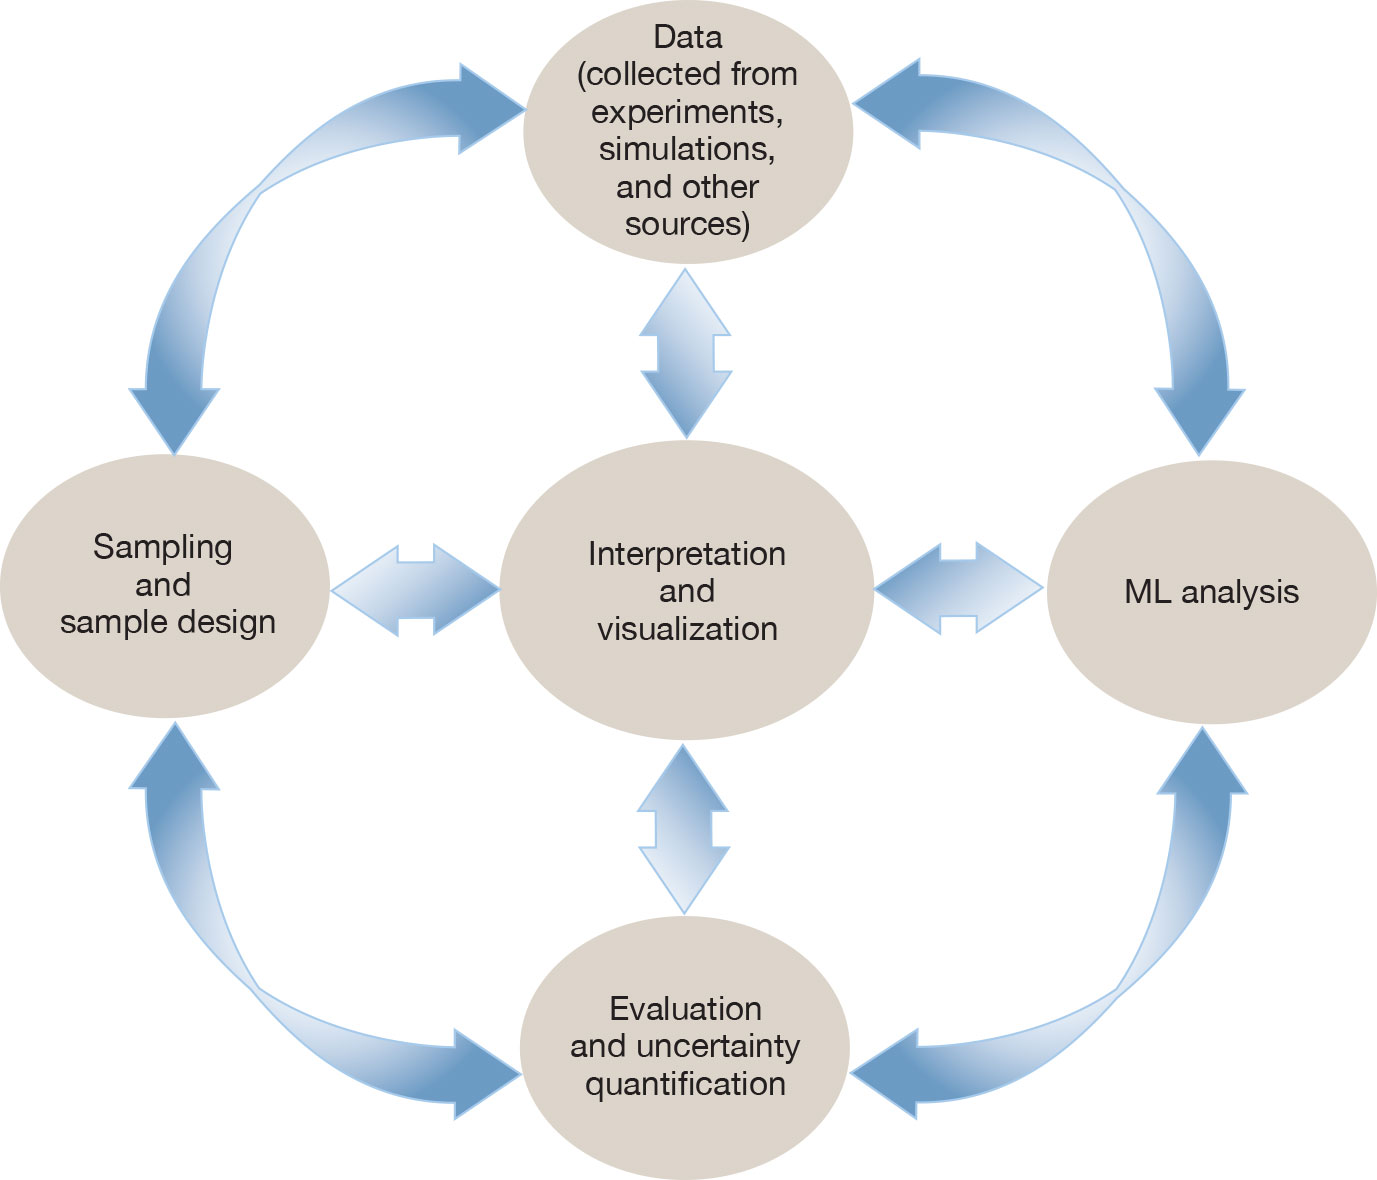 Circular diagram with clockwise steps, from left, of Sampling and sample design; Data (collected from experiments, simulations, and other sources); ML analysis; and Evaluation and uncertainty quantification. The middle of the circle is labeled with Interpretation and visualization. All circles are connected by arrows in both directions.